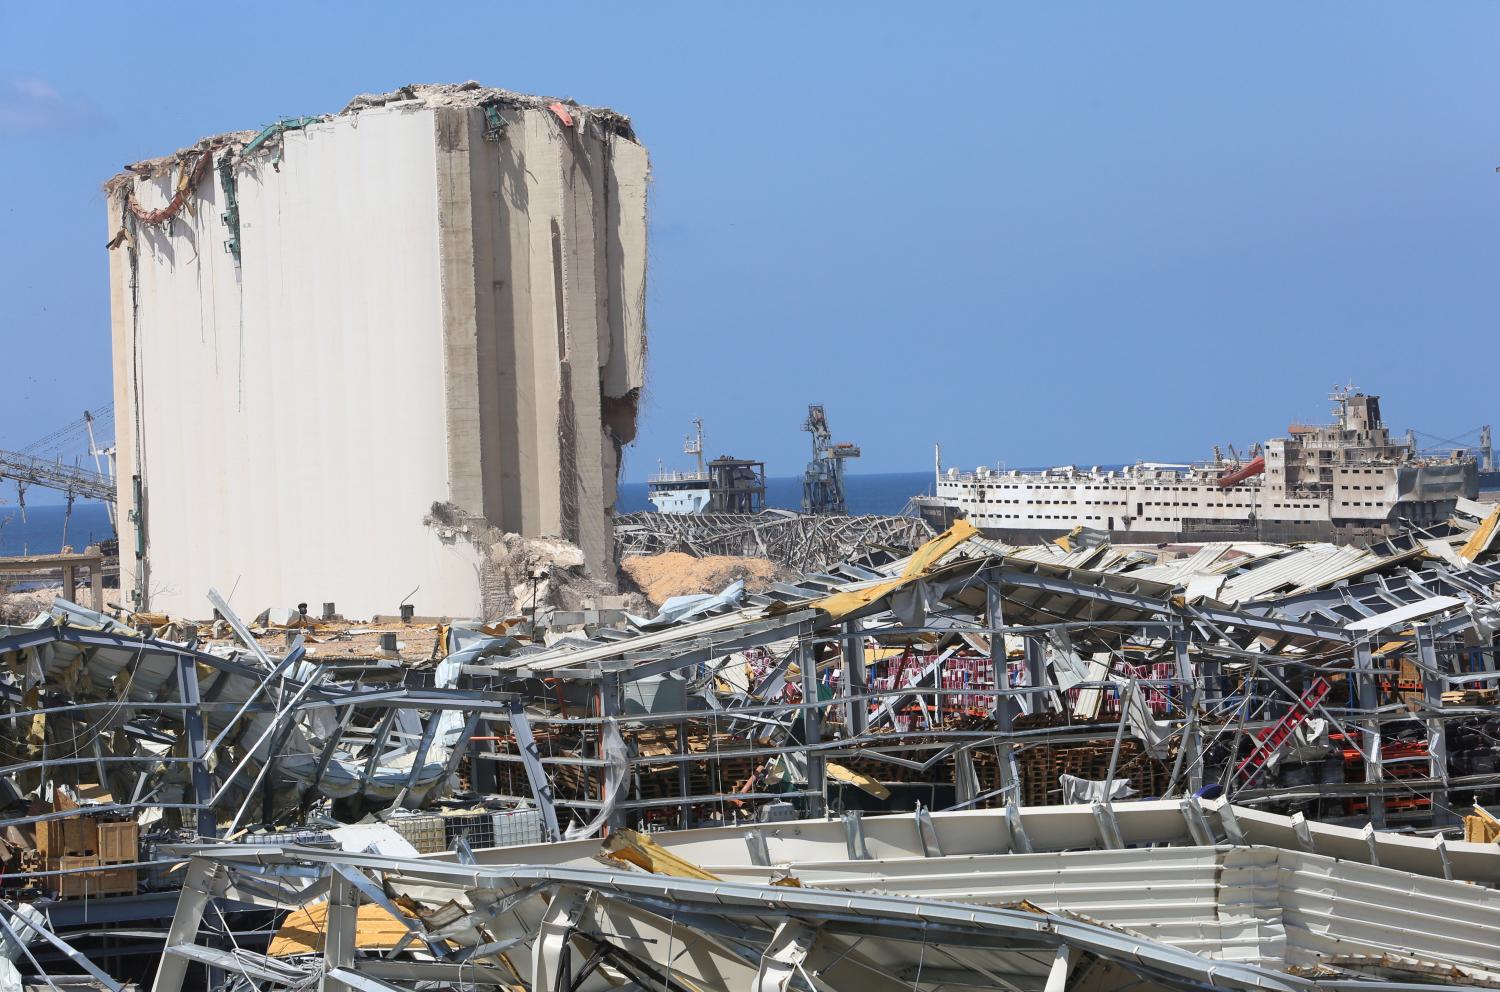 FILE PHOTO: A view shows the damage at the site of a massive explosion in Beirut port, Lebanon August 17, 2020. REUTERS/Aziz Taher/File Photo